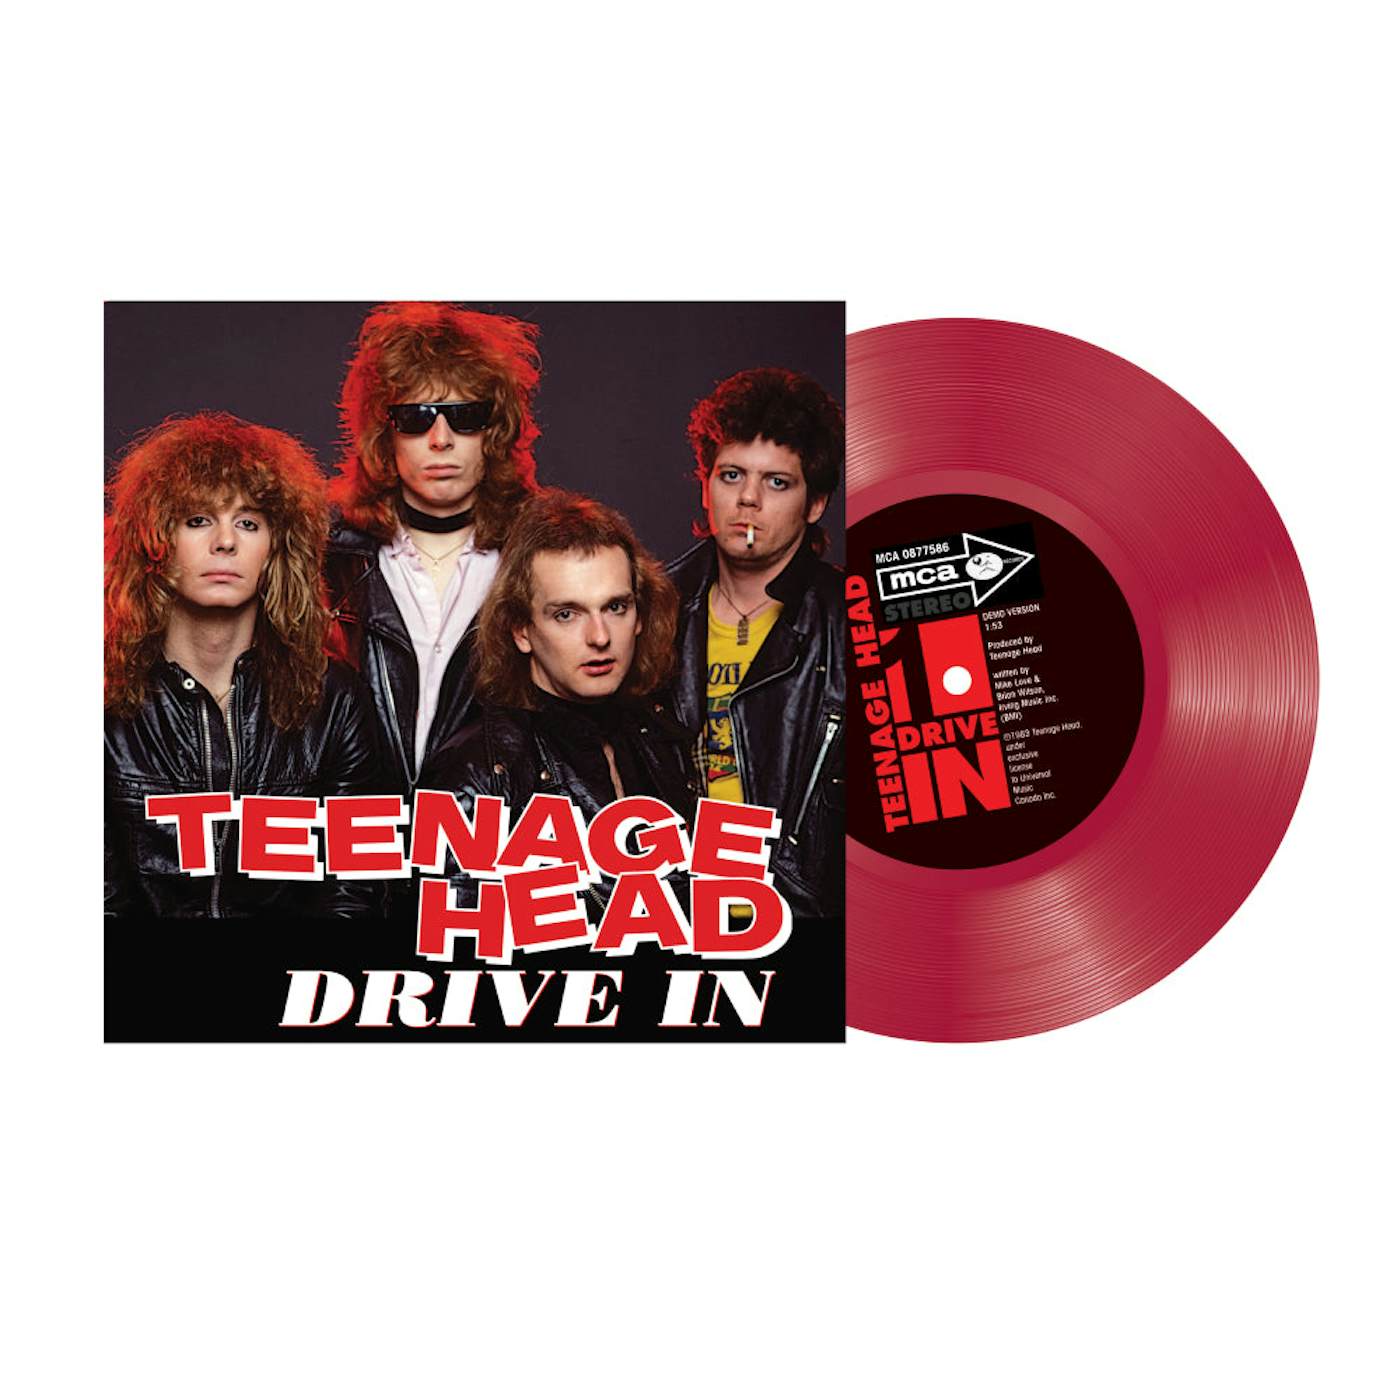 Teenage Head Drive In 7inch Red